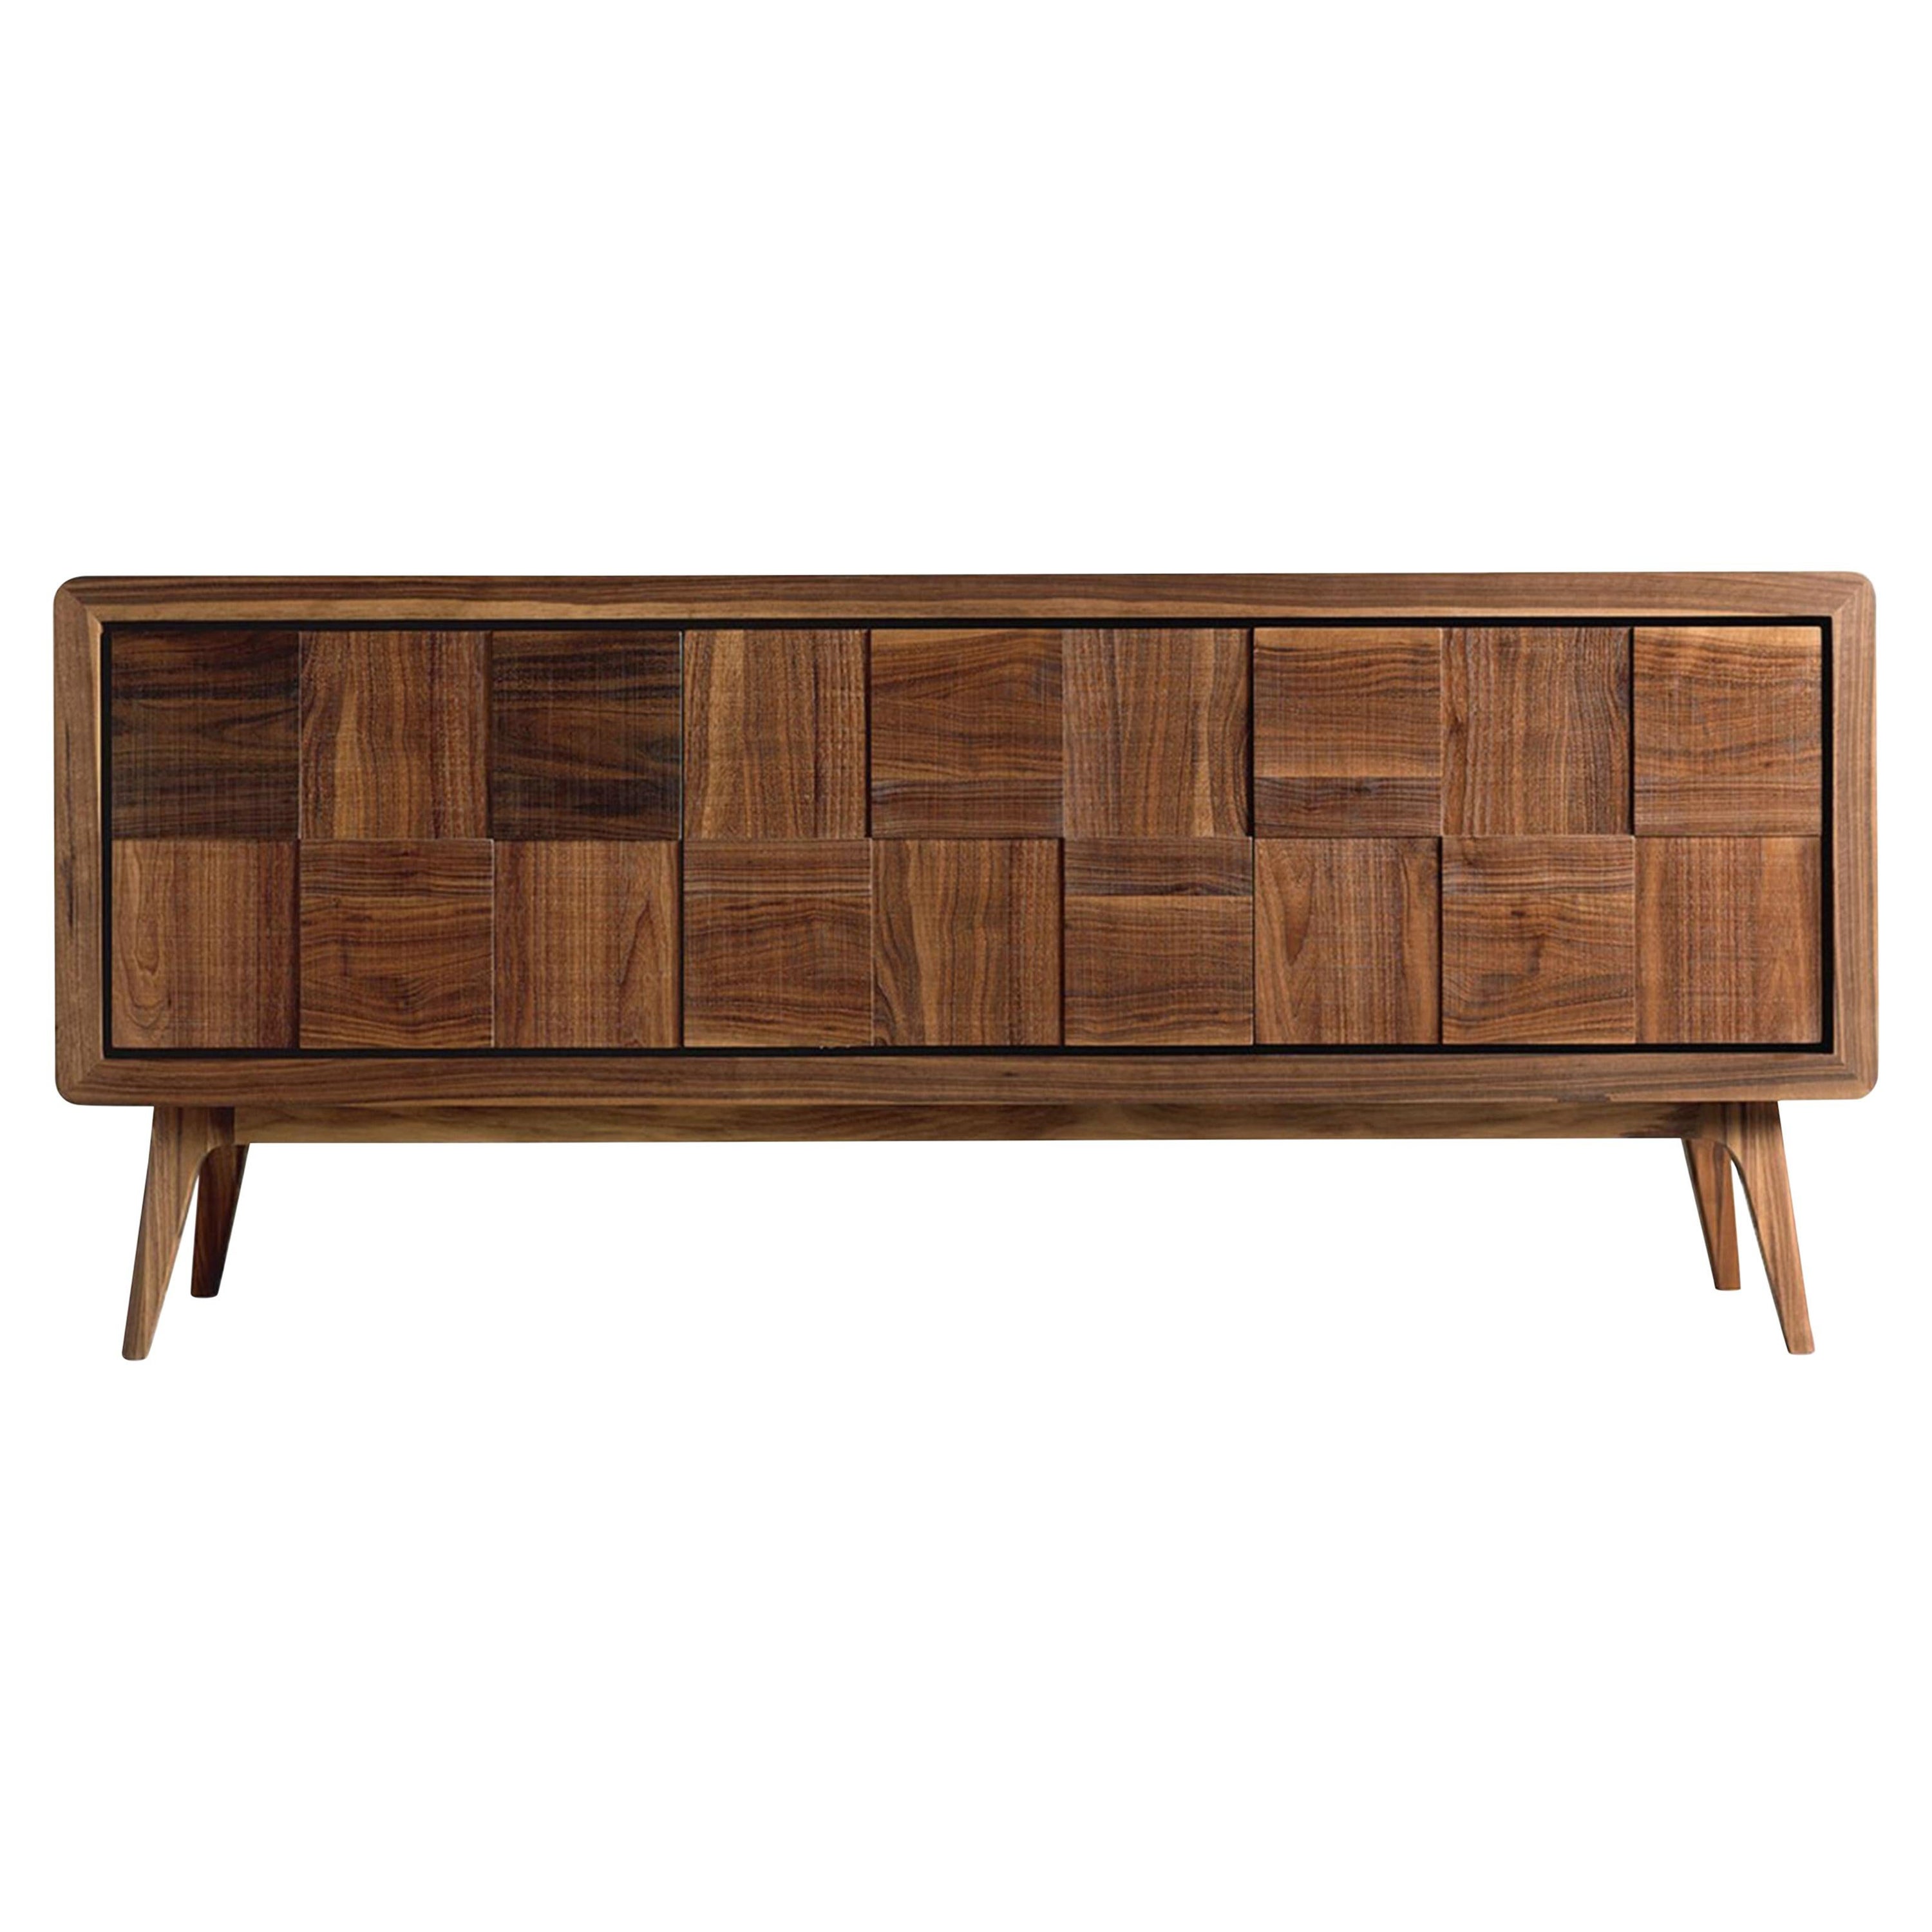 Artes Quadro Solid Wood Sideboard, Walnut Natural Finish, Contemporary For Sale